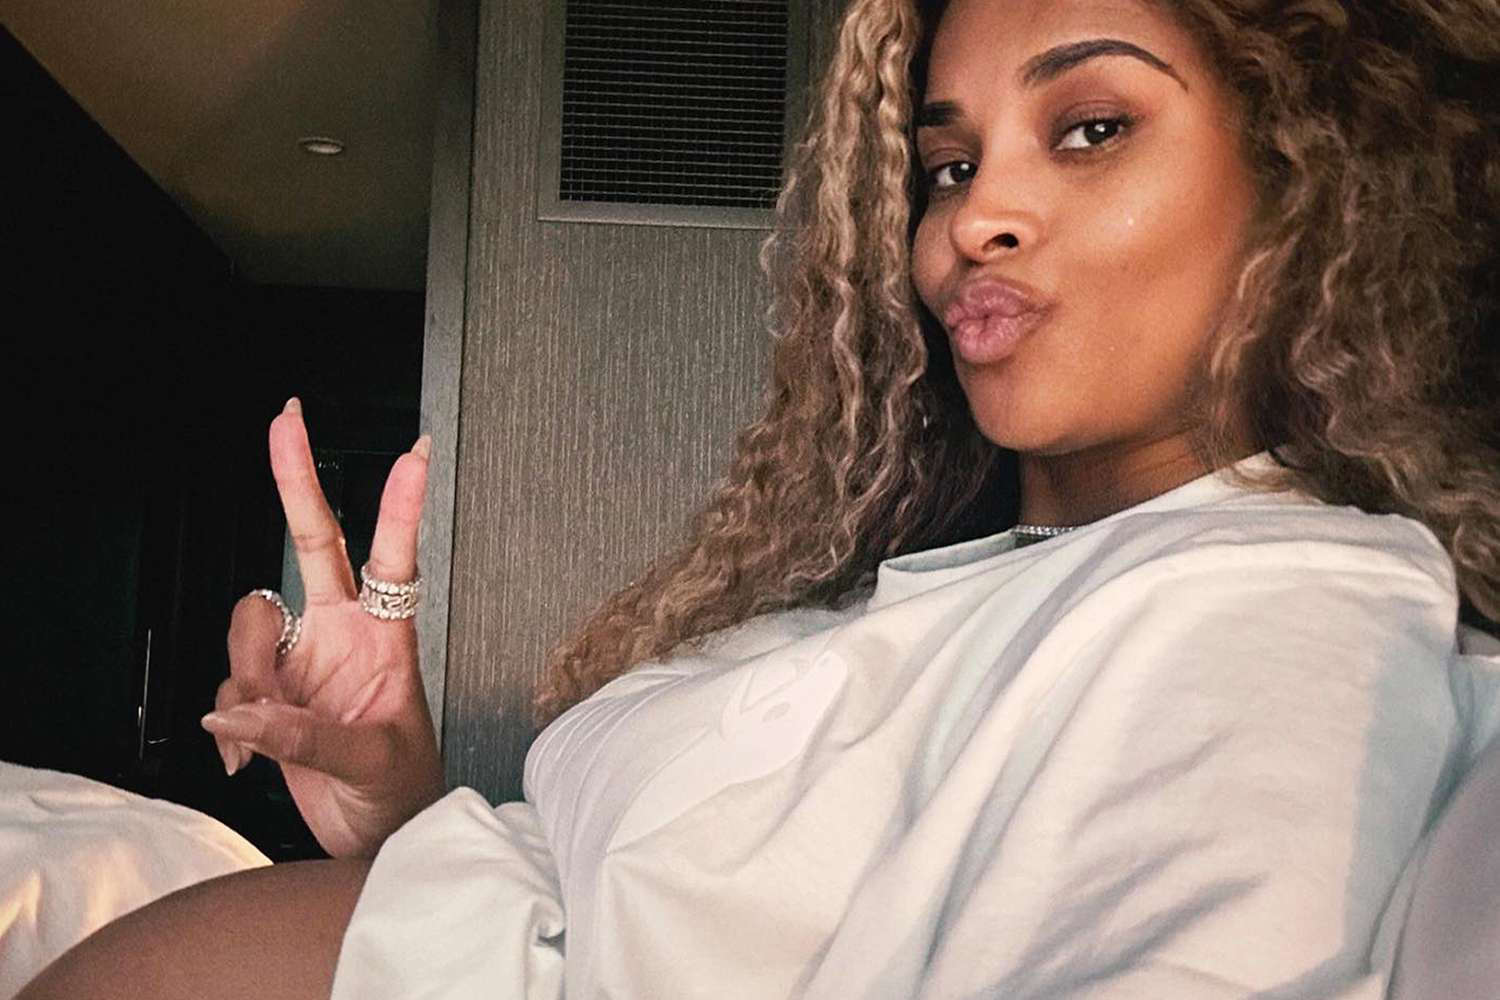 1. Ciara shows off her blonde hair while pregnant - wide 4